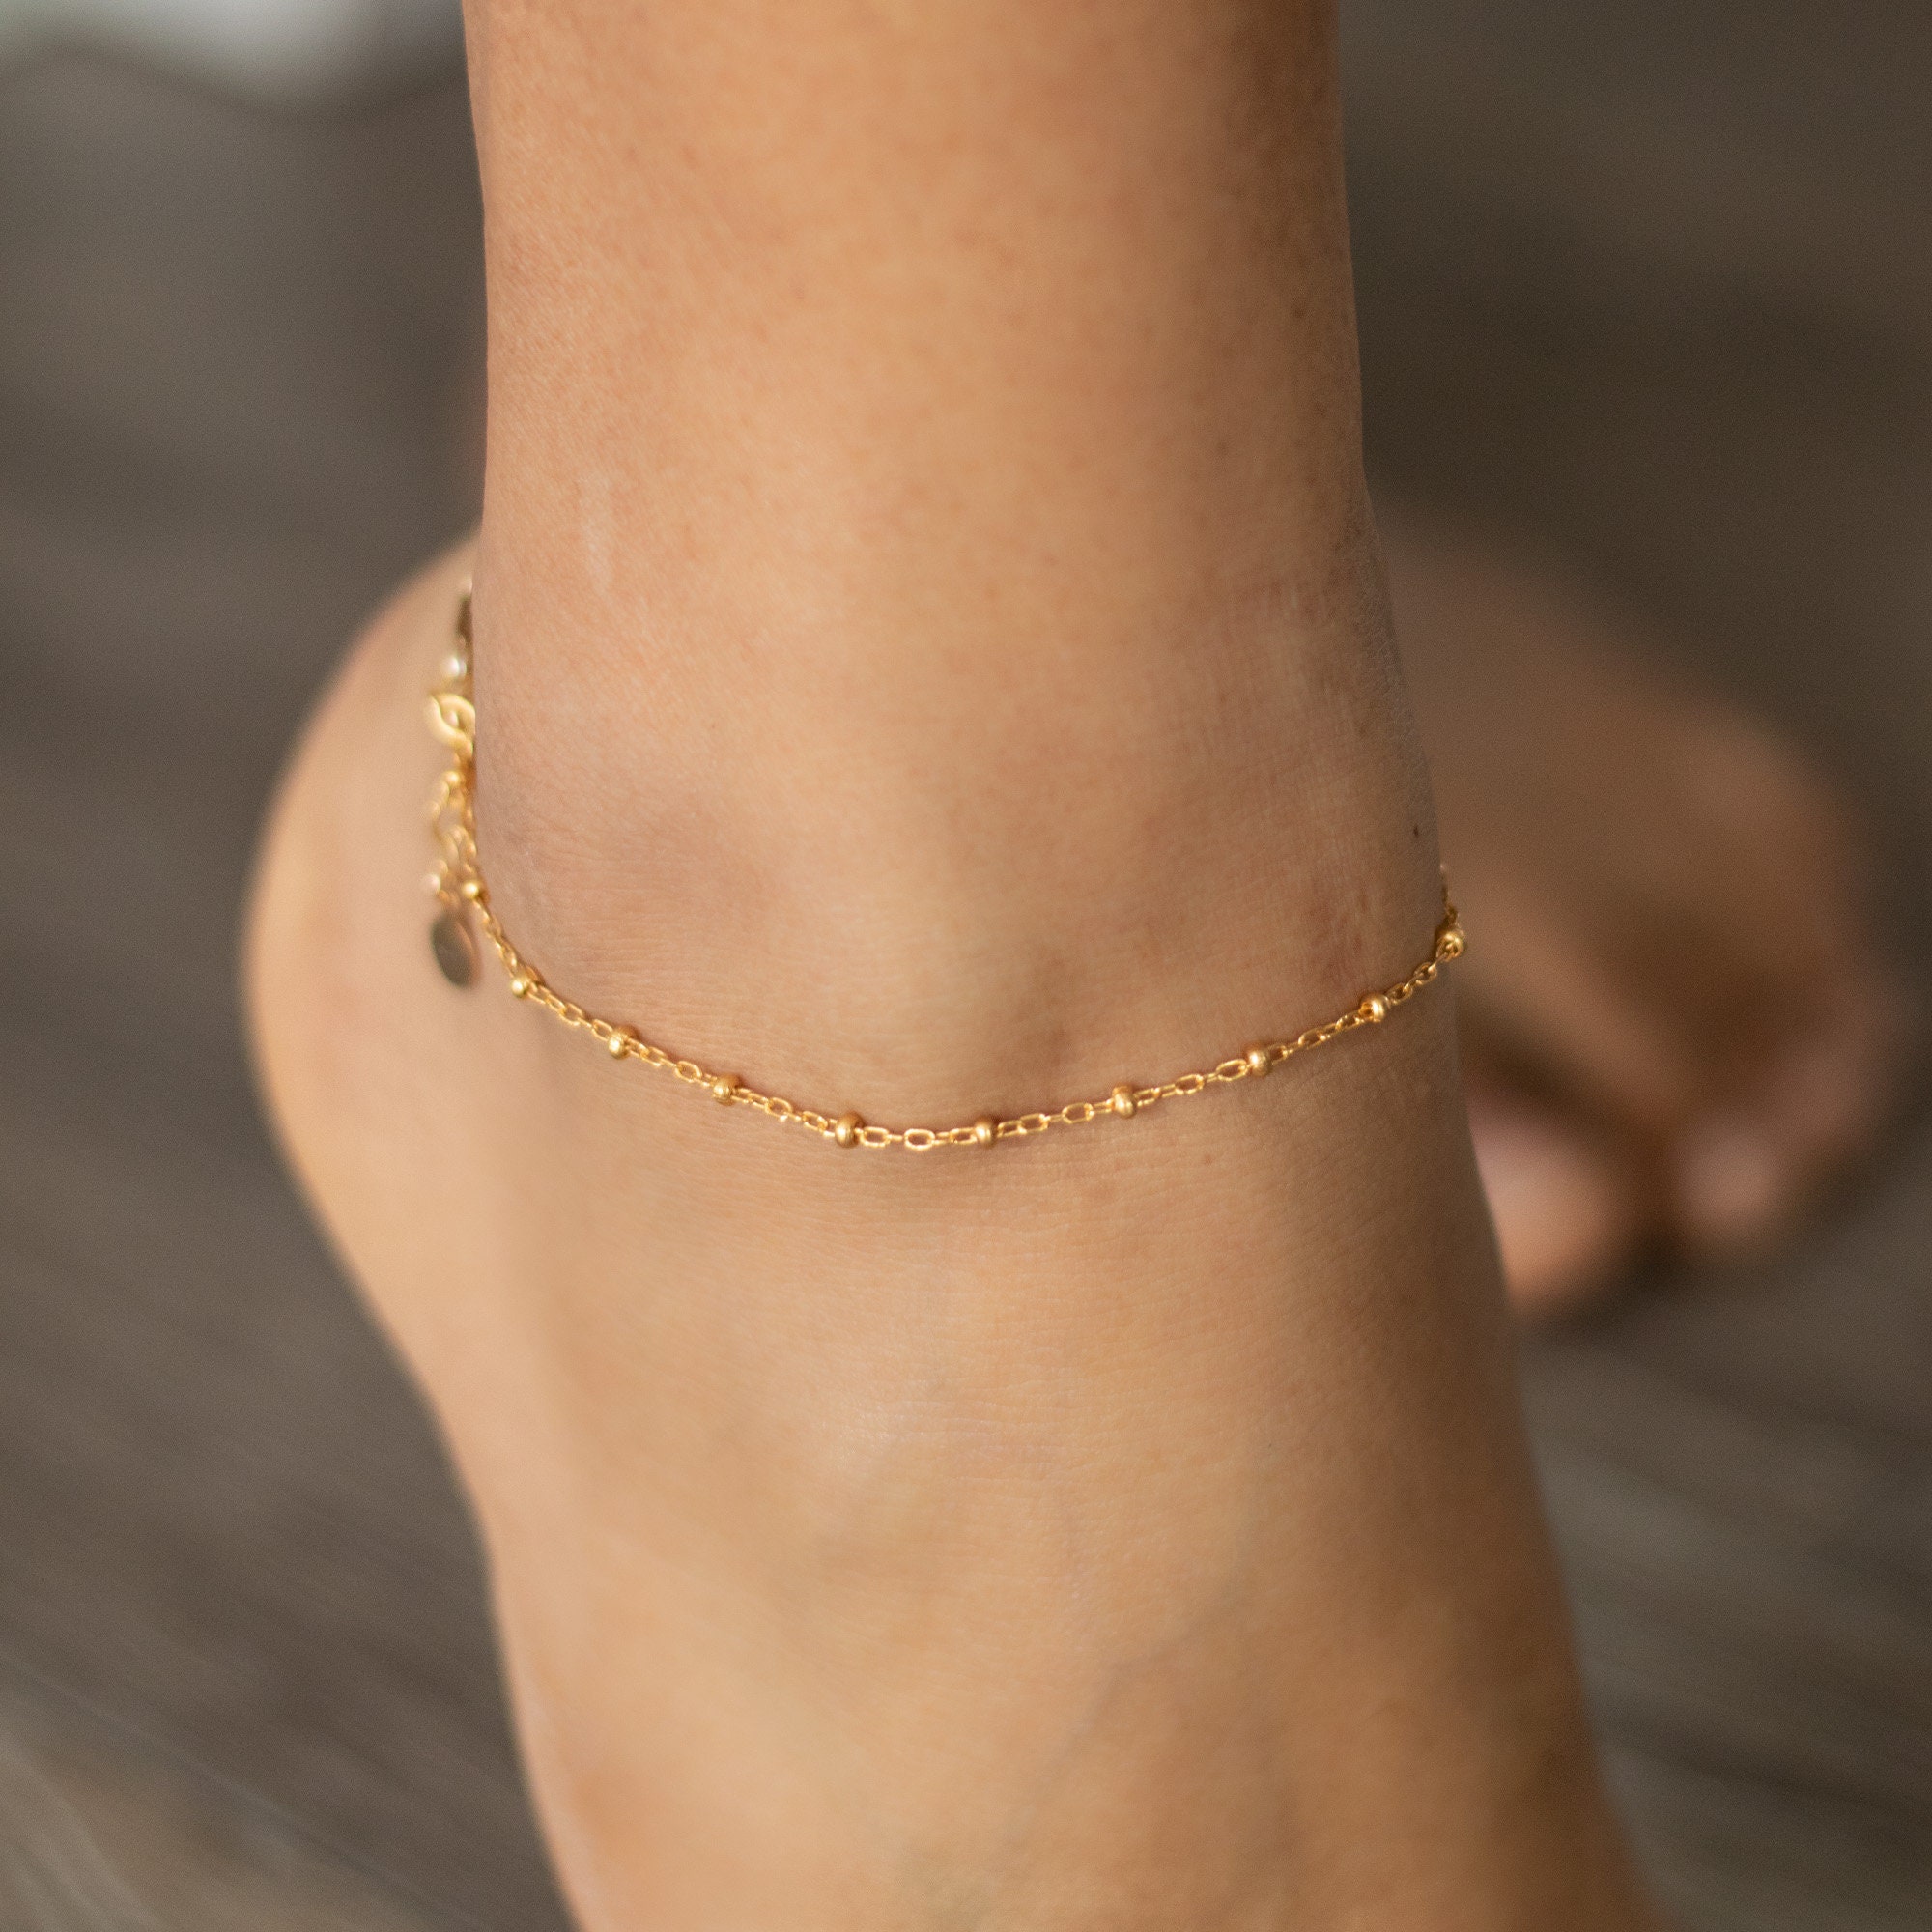 Gold Plated Necklace Chain, Vermeil Sterling Silver Necklace Chain-Bracelet,  Anklet - Vermeil Chain Bulk - Tiny Curb Chain-Necklace - All Sizes.